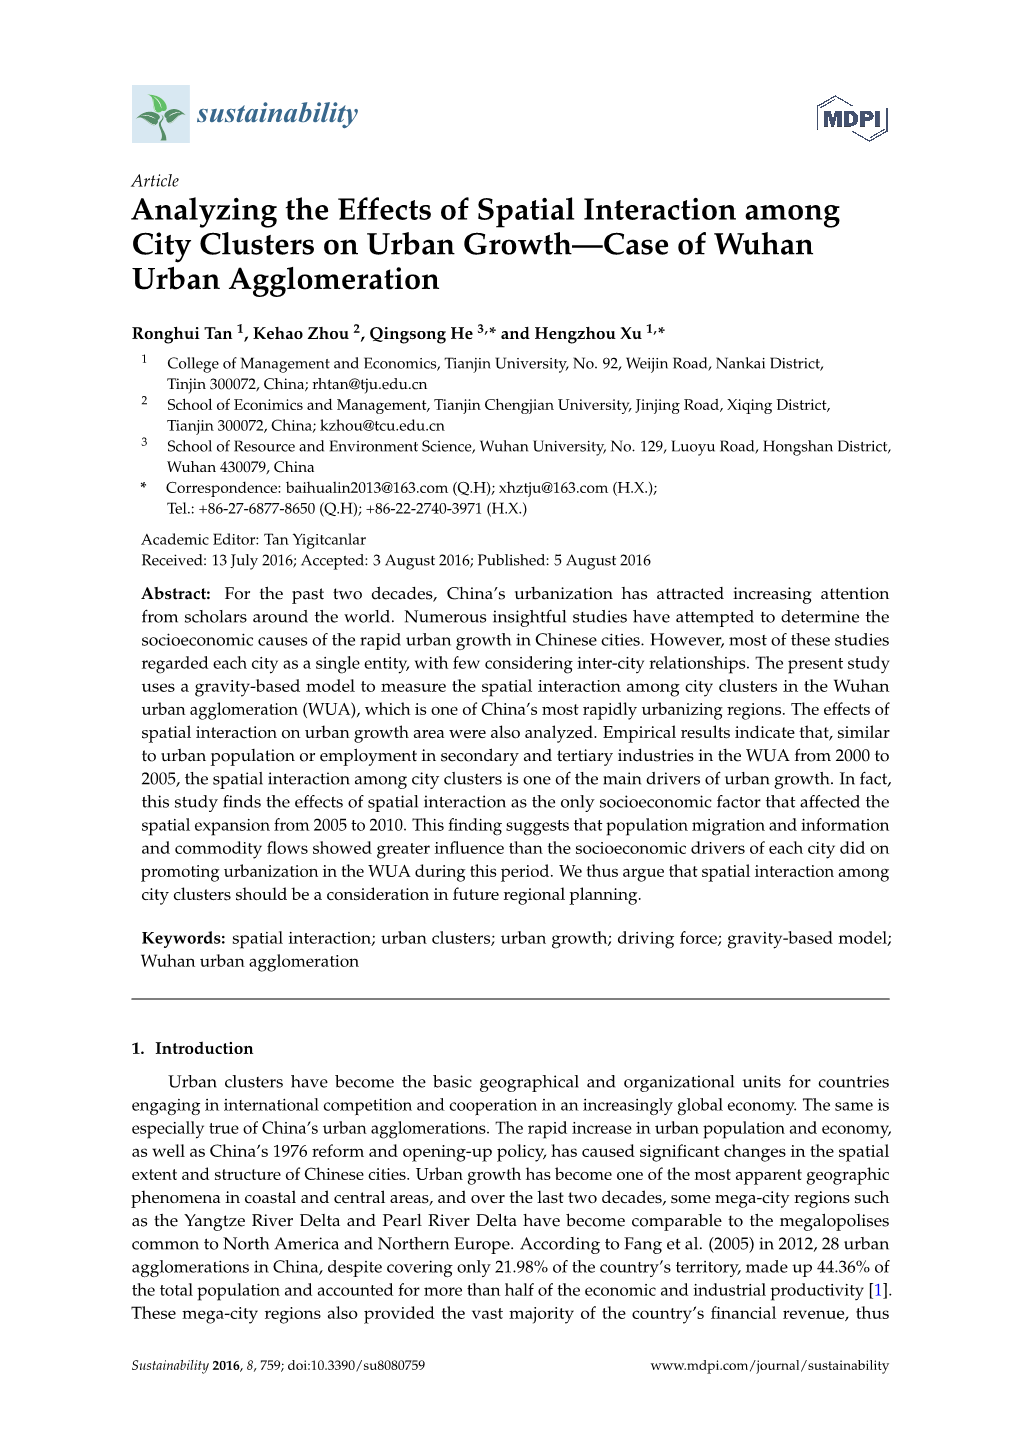 Analyzing the Effects of Spatial Interaction Among City Clusters on Urban Growth—Case of Wuhan Urban Agglomeration